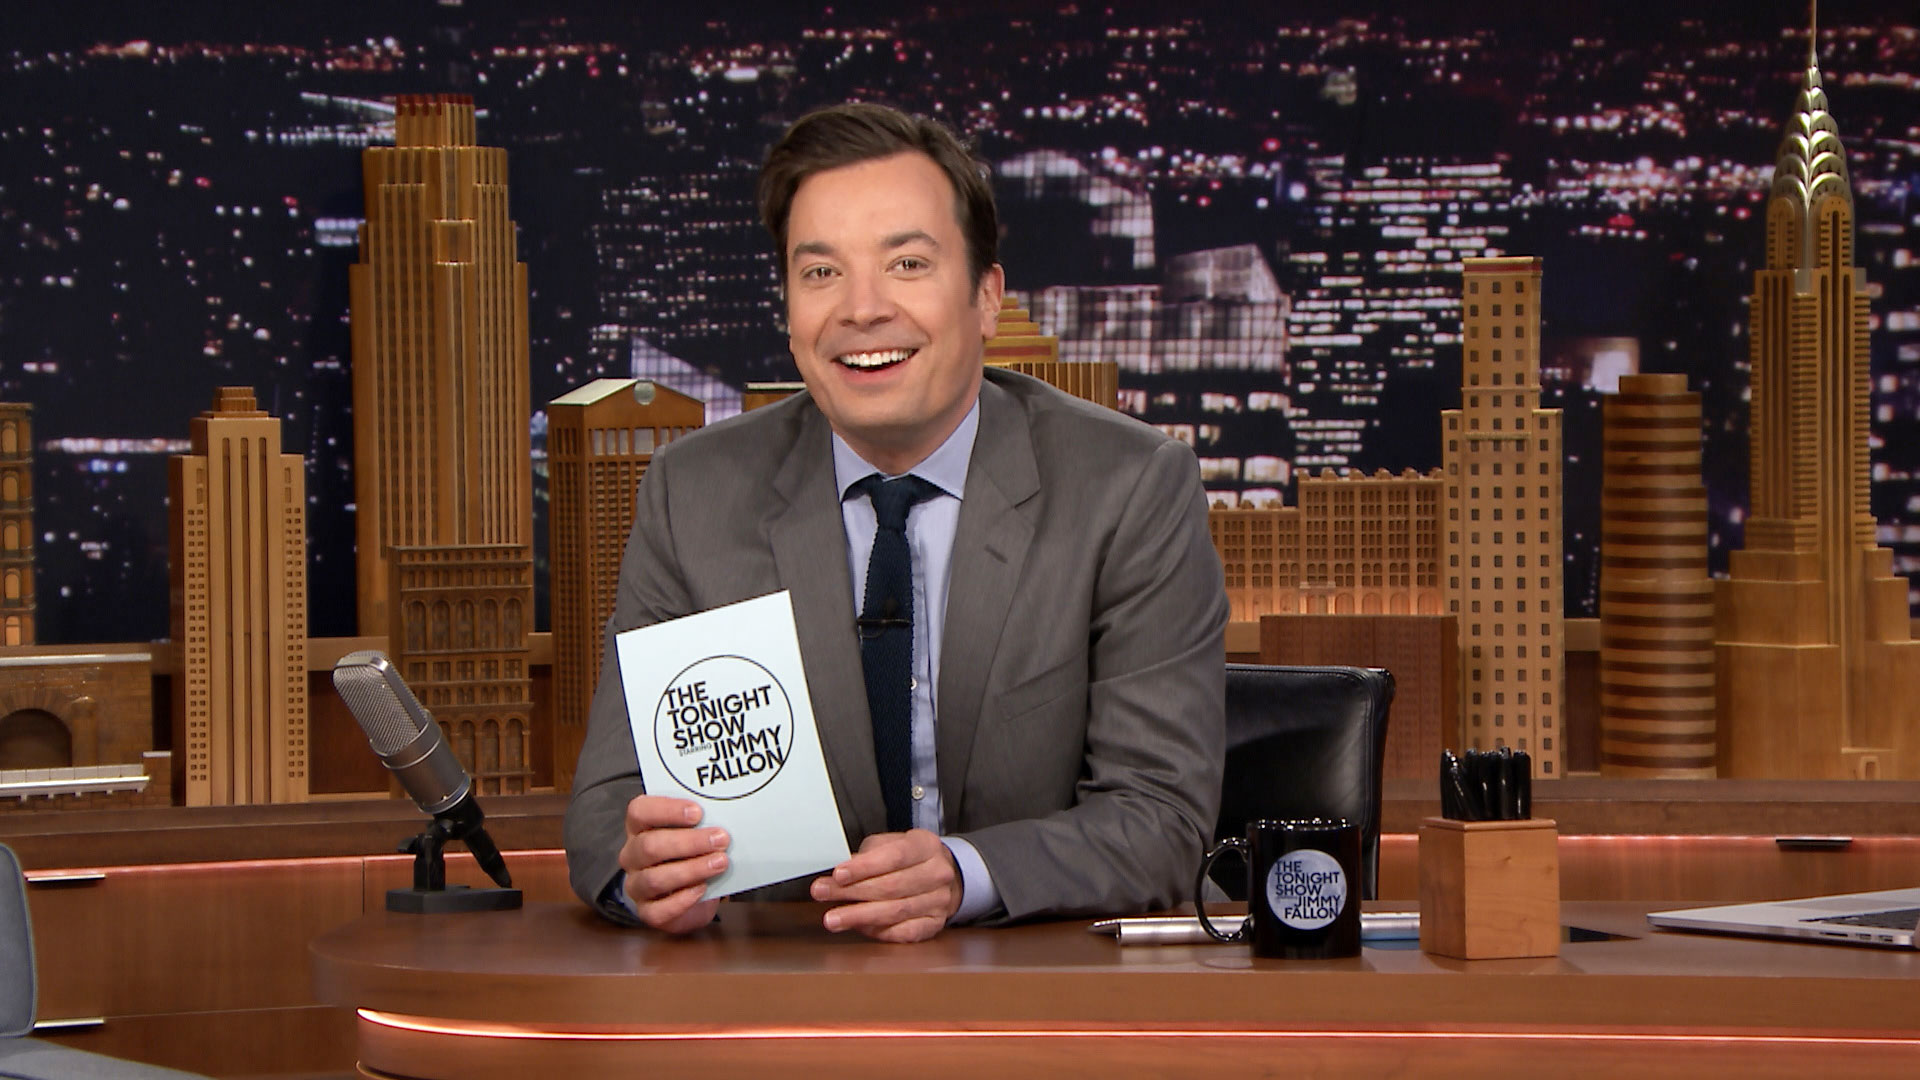 Watch The Tonight Show Starring Jimmy Fallon Highlight: Pros and Cons